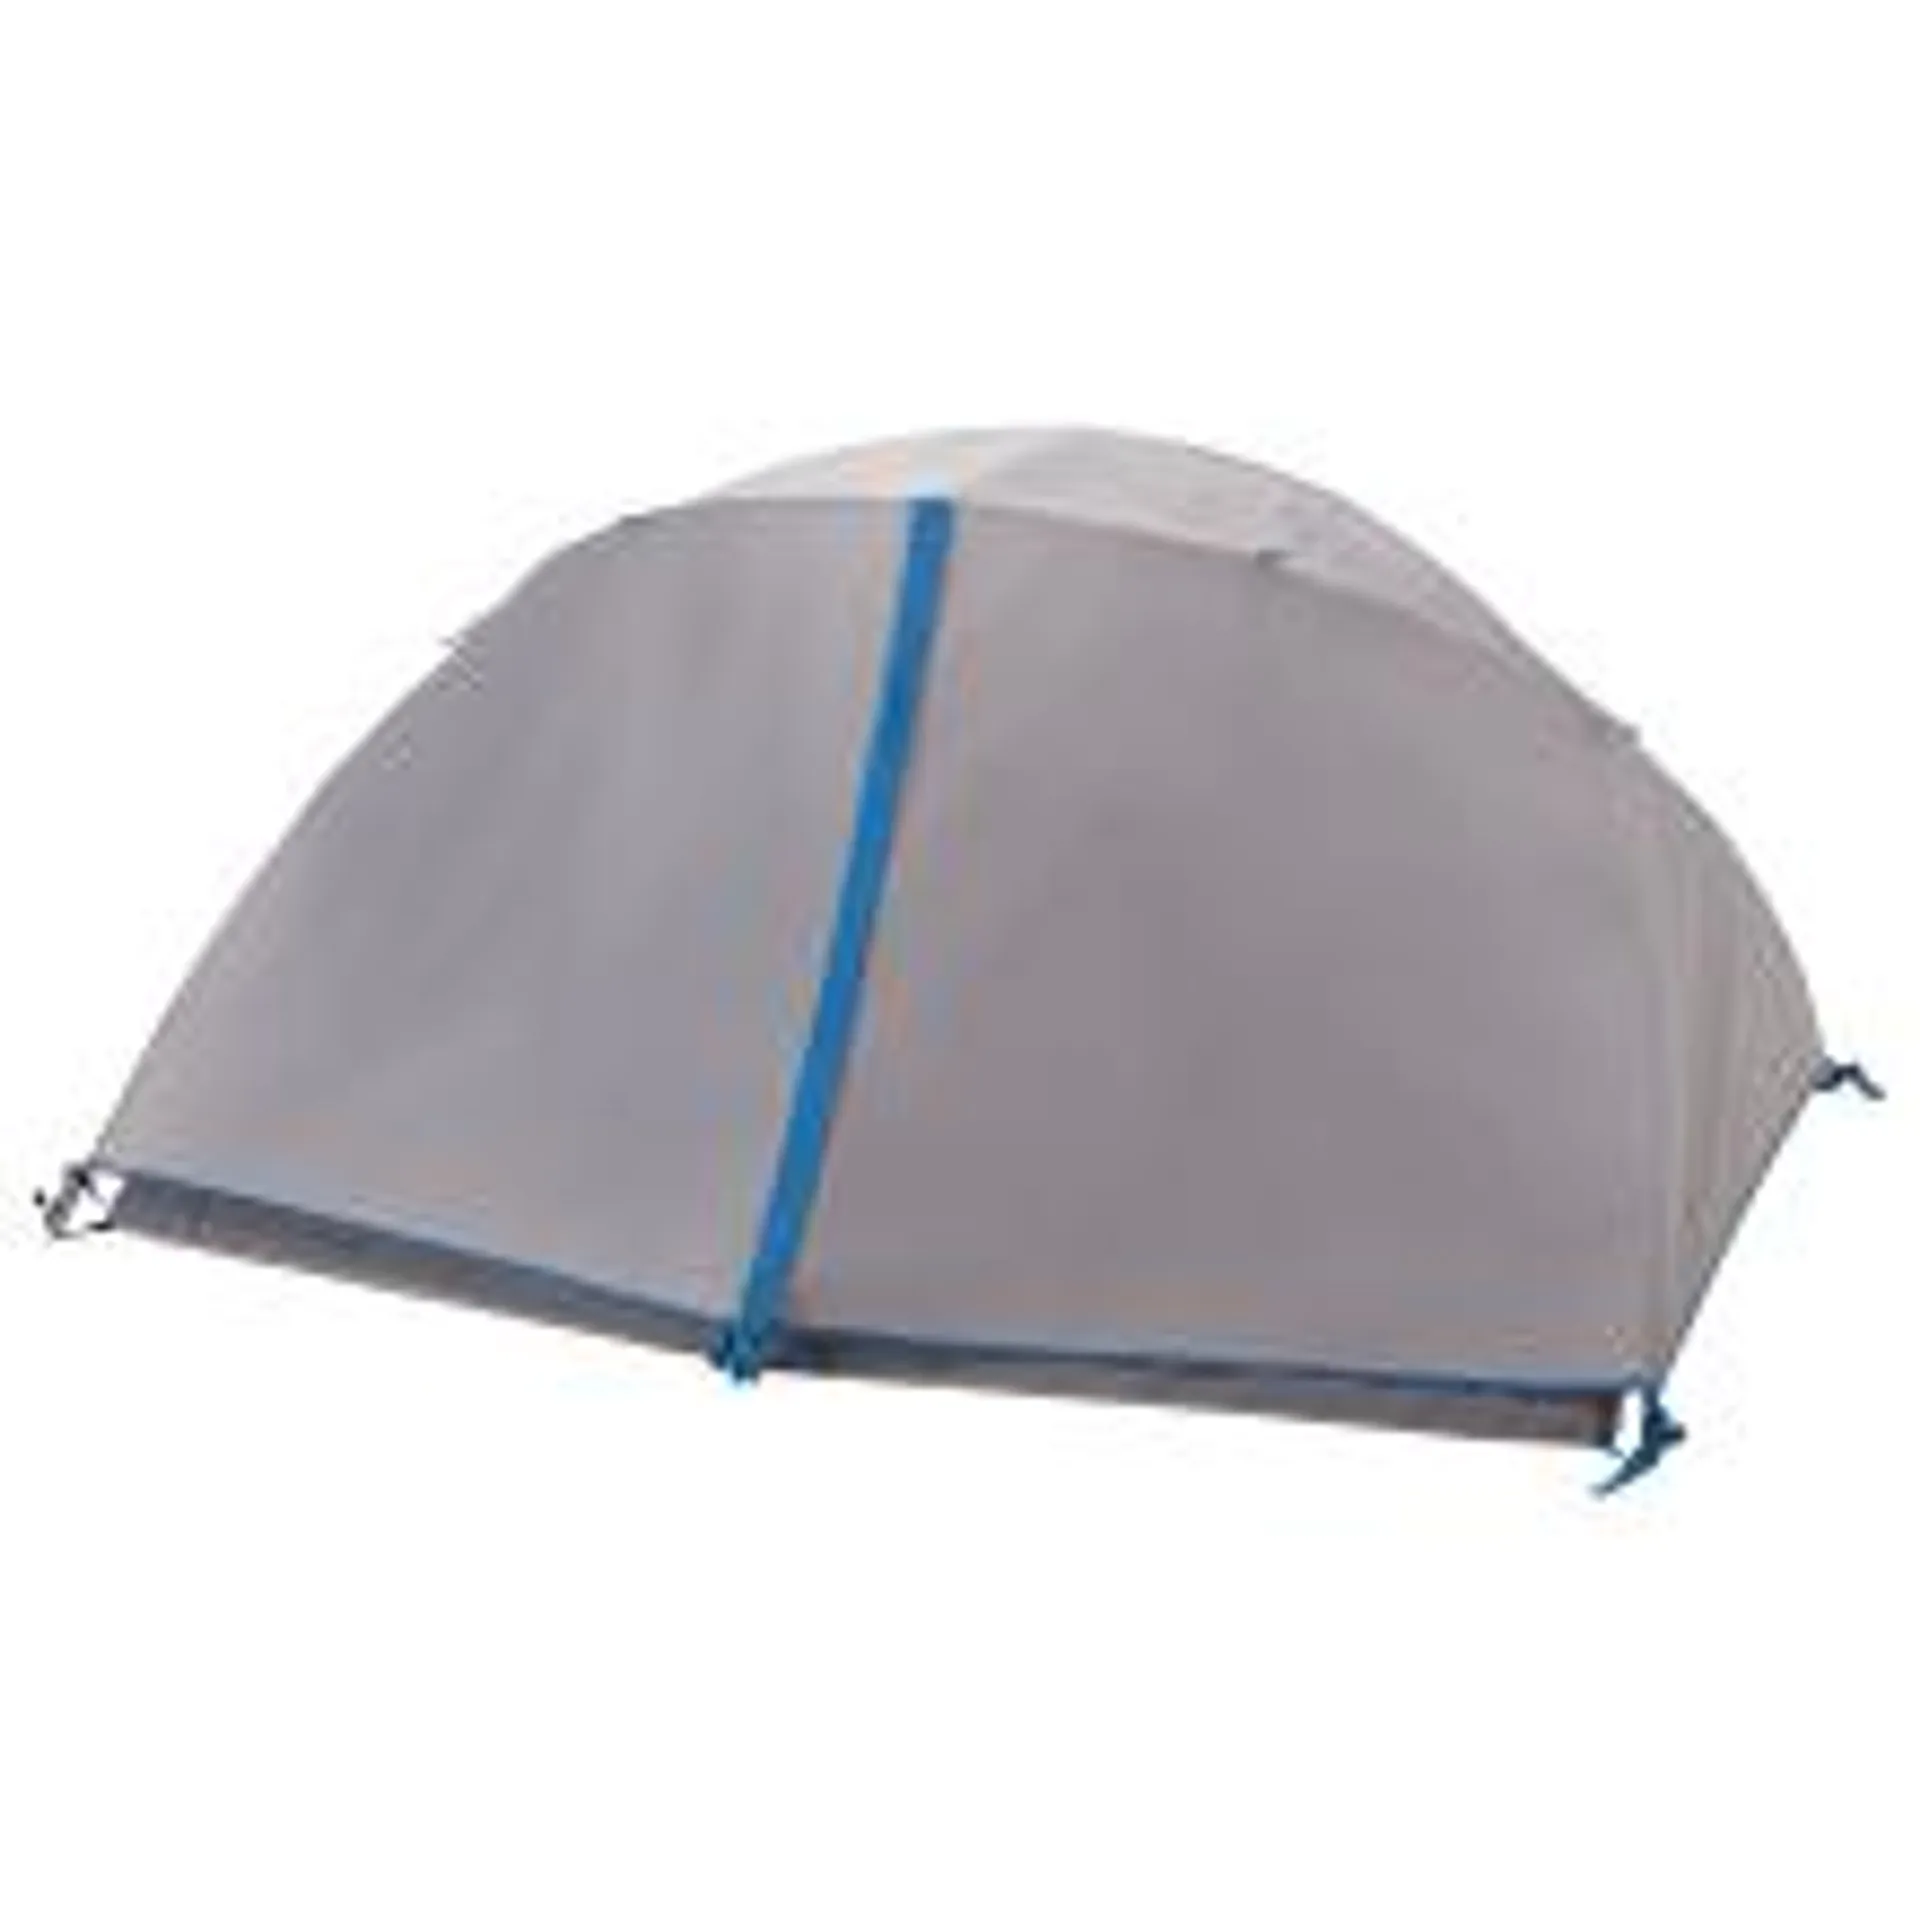 Bass Pro Shops Eclipse 2-Person Backpacking Tent